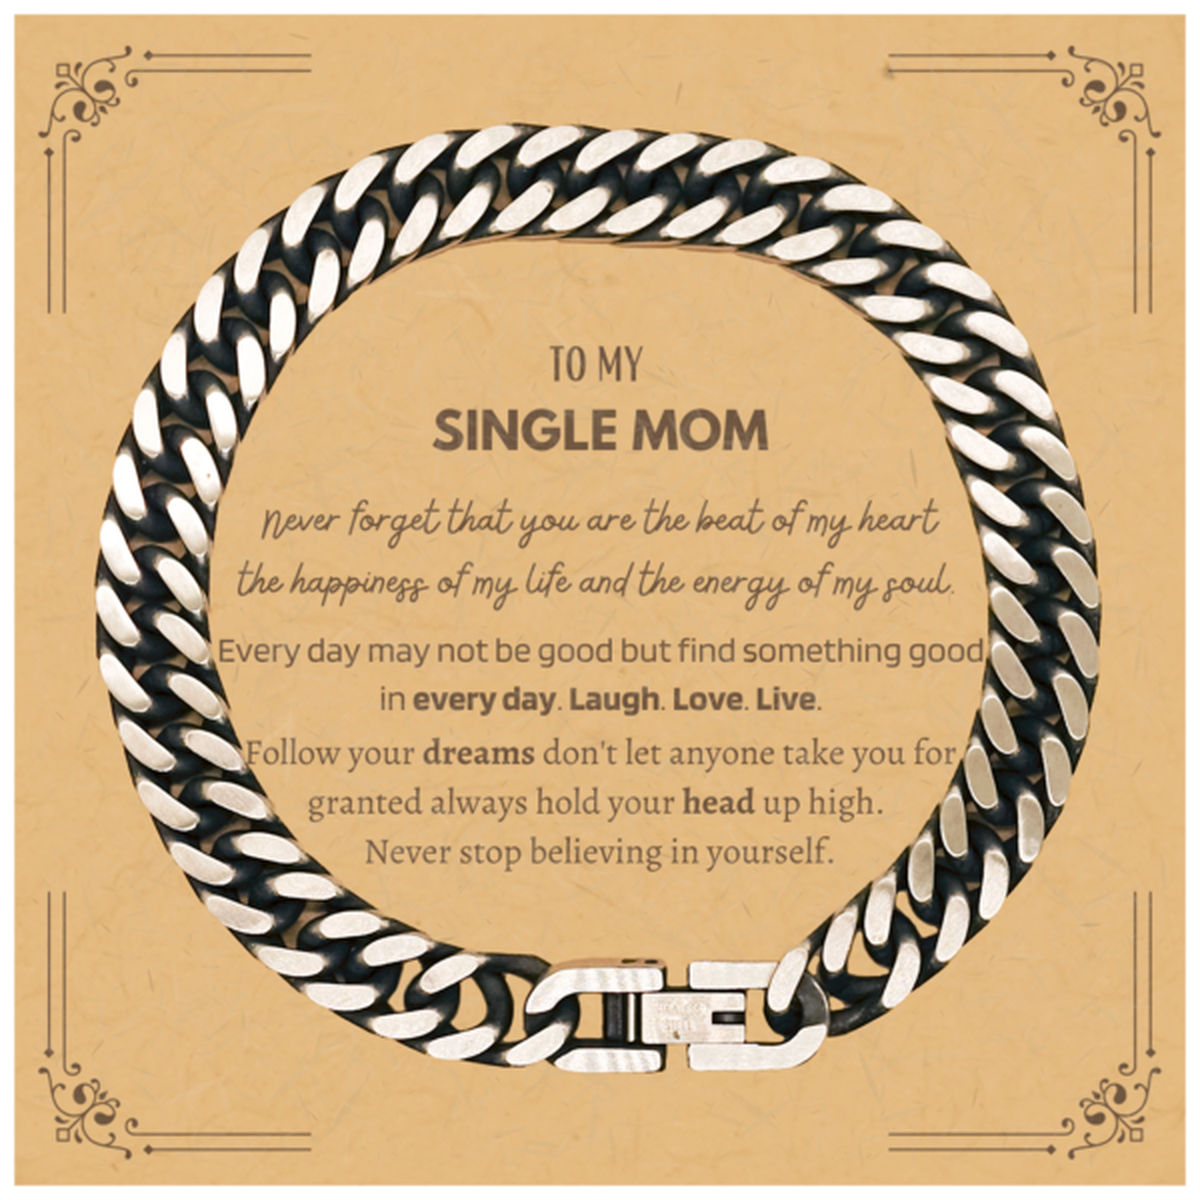 To My Single Mom Message Card Gifts, Christmas Single Mom Cuban Link Chain Bracelet Present, Birthday Unique Motivational For Single Mom, To My Single Mom Never forget that you are the beat of my heart the happiness of my life and the energy of my soul